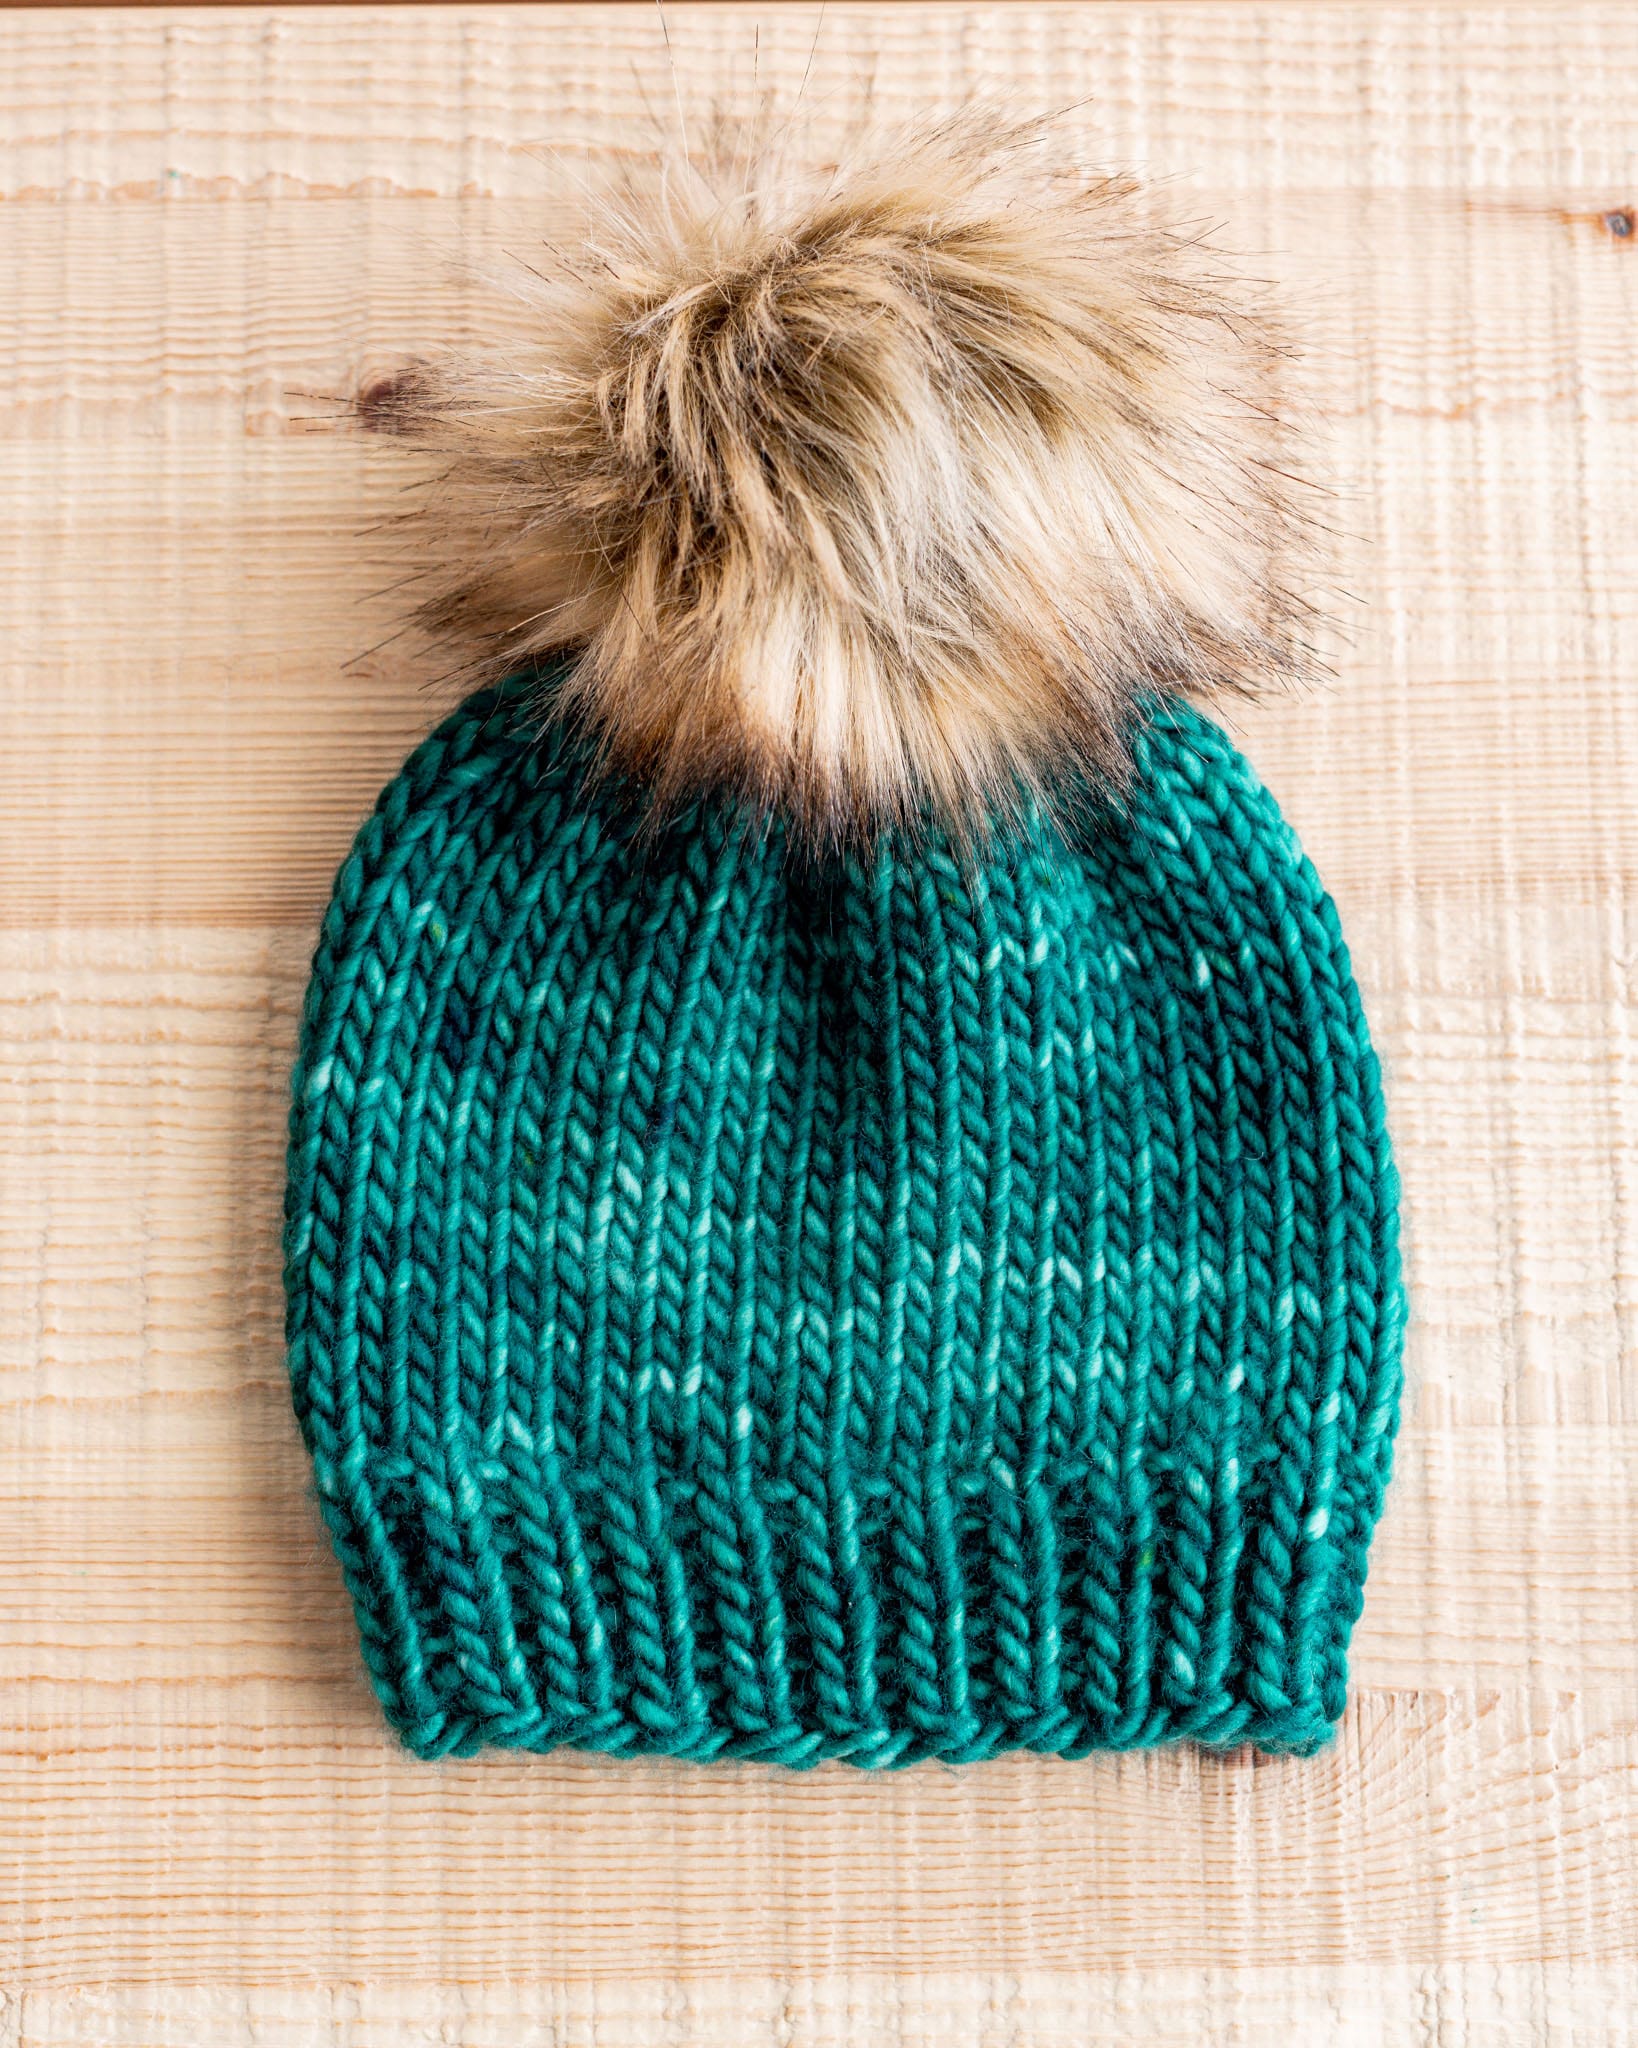 Adult Size Knitted Beanie